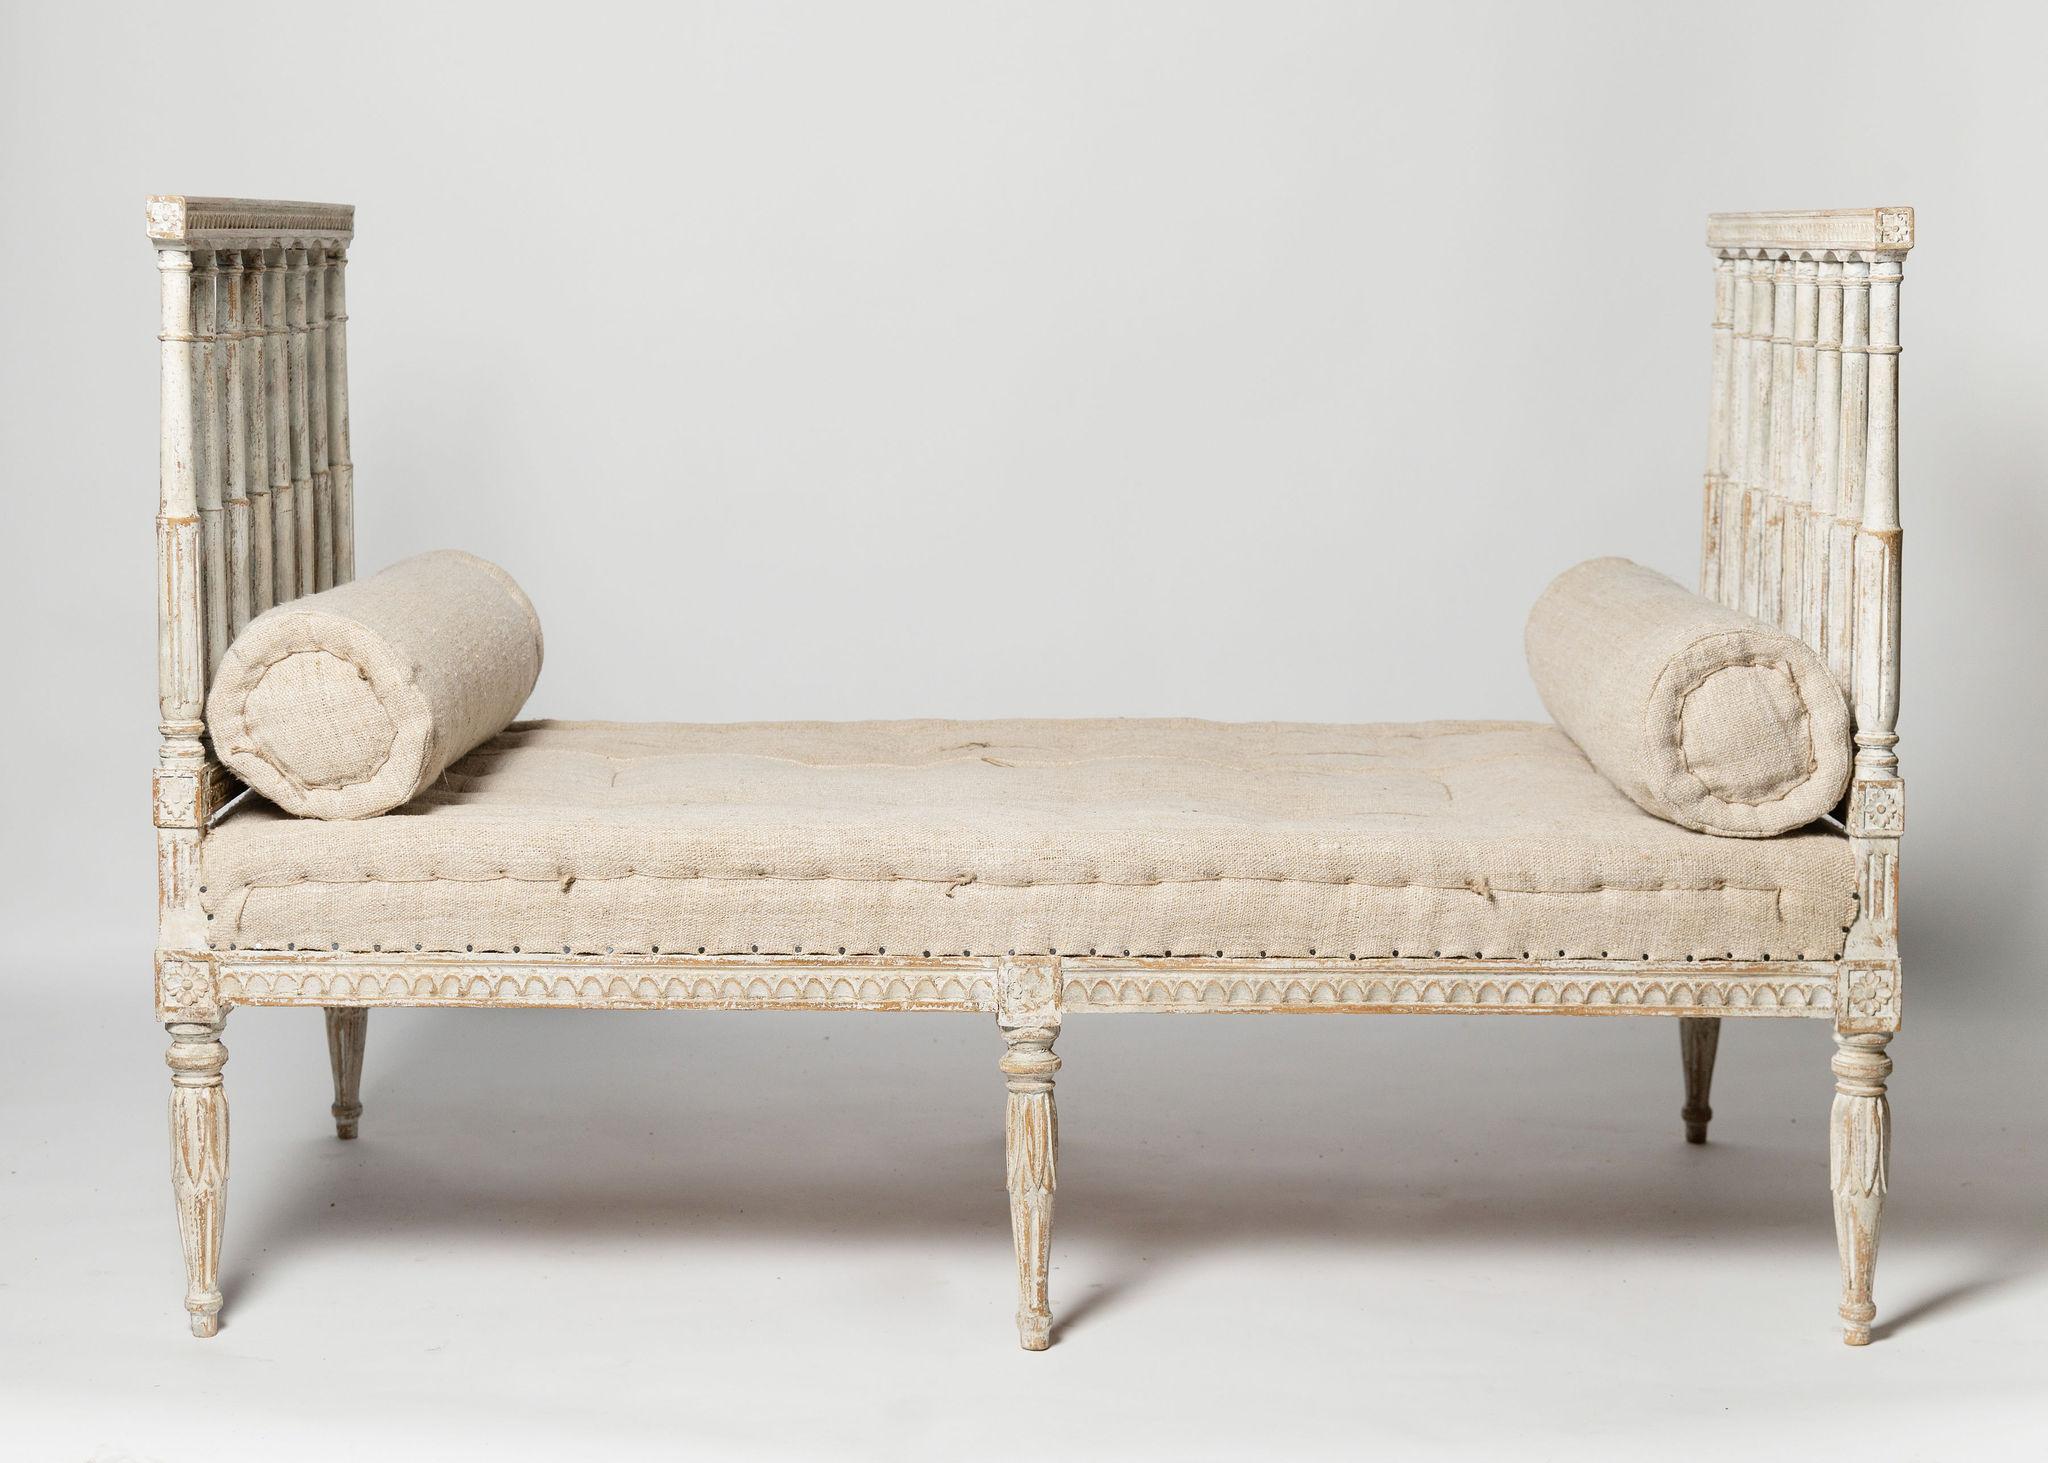 19th Century Antique Swedish daybed, sofa, stool, c1800, gustavian, Swedish upholstery   For Sale